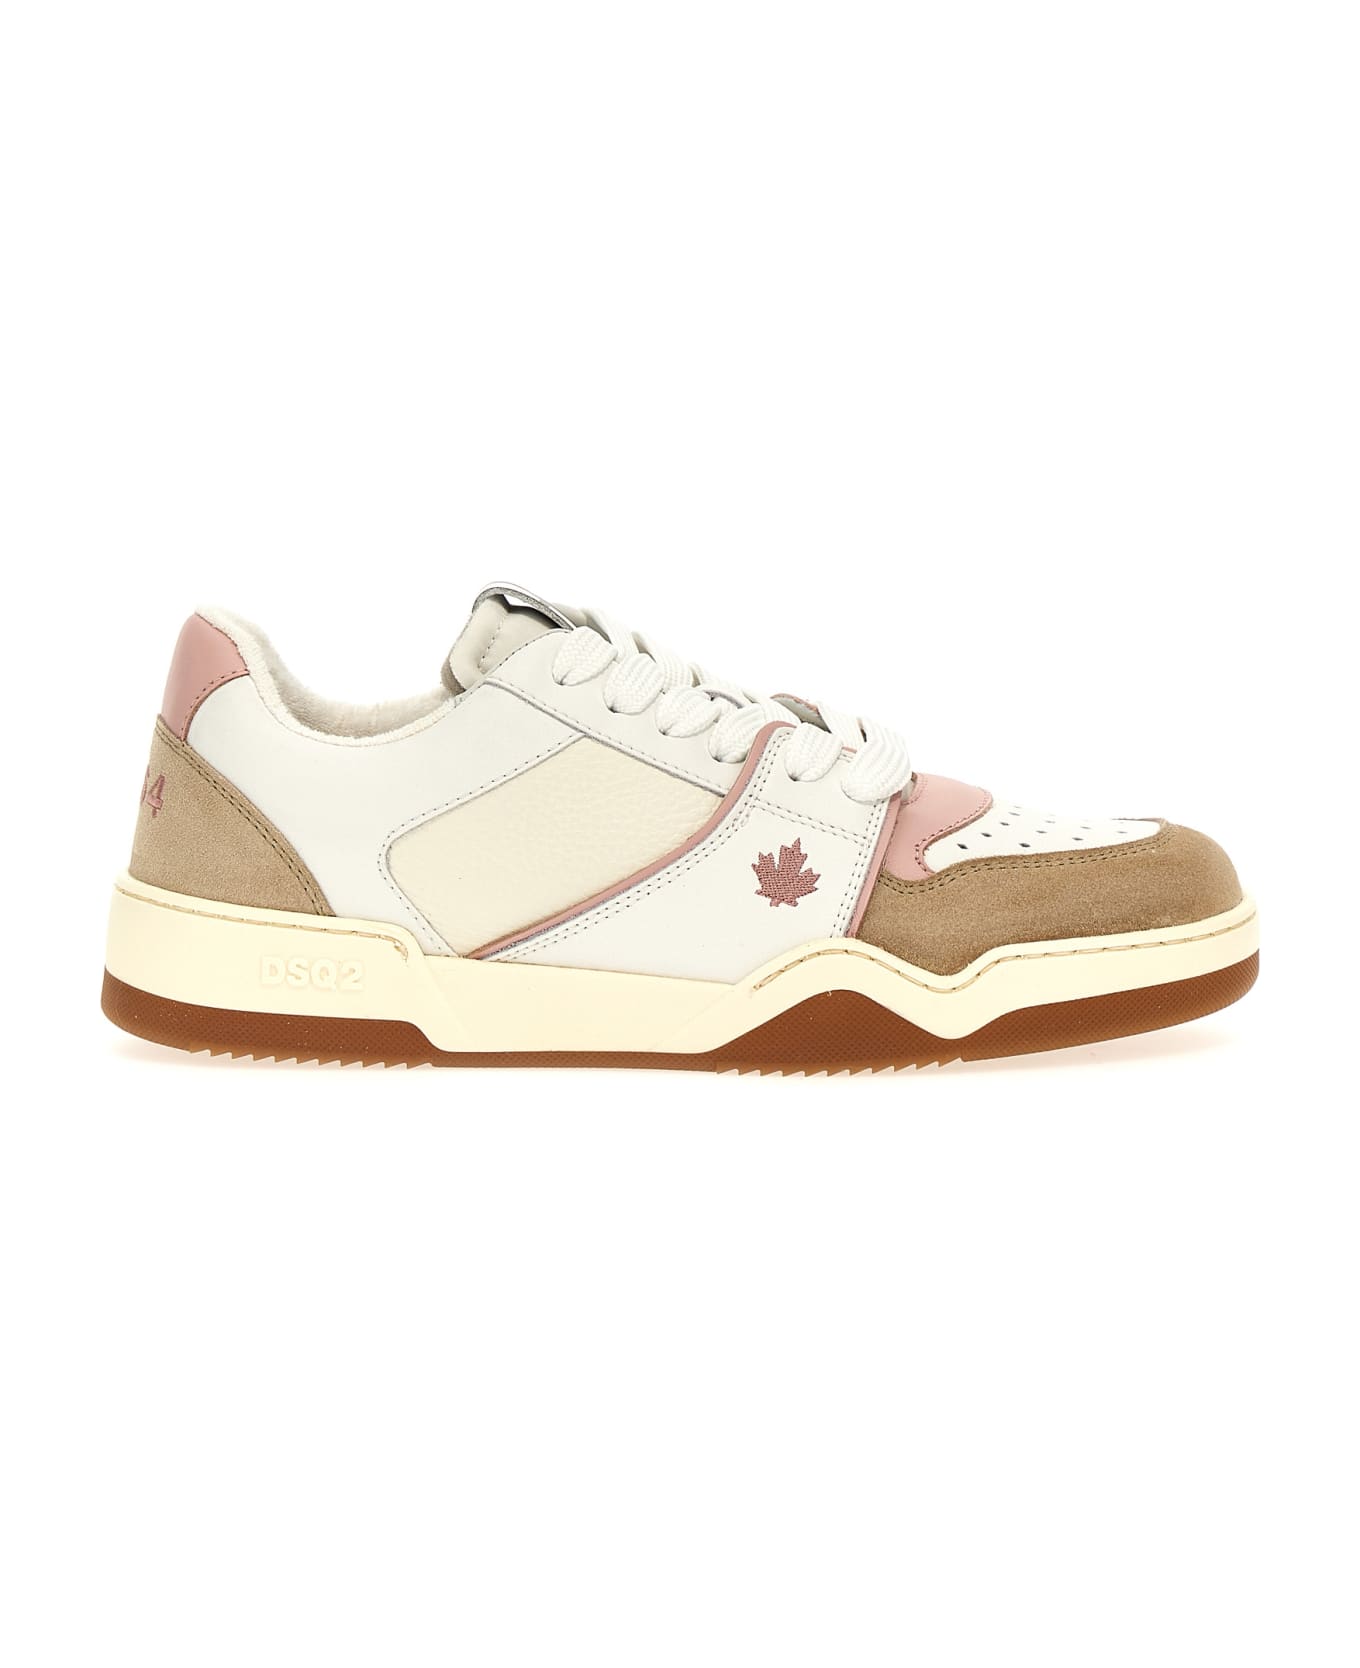 Dsquared2 Leather And Suede Sneakers - WHITE/PINK スニーカー